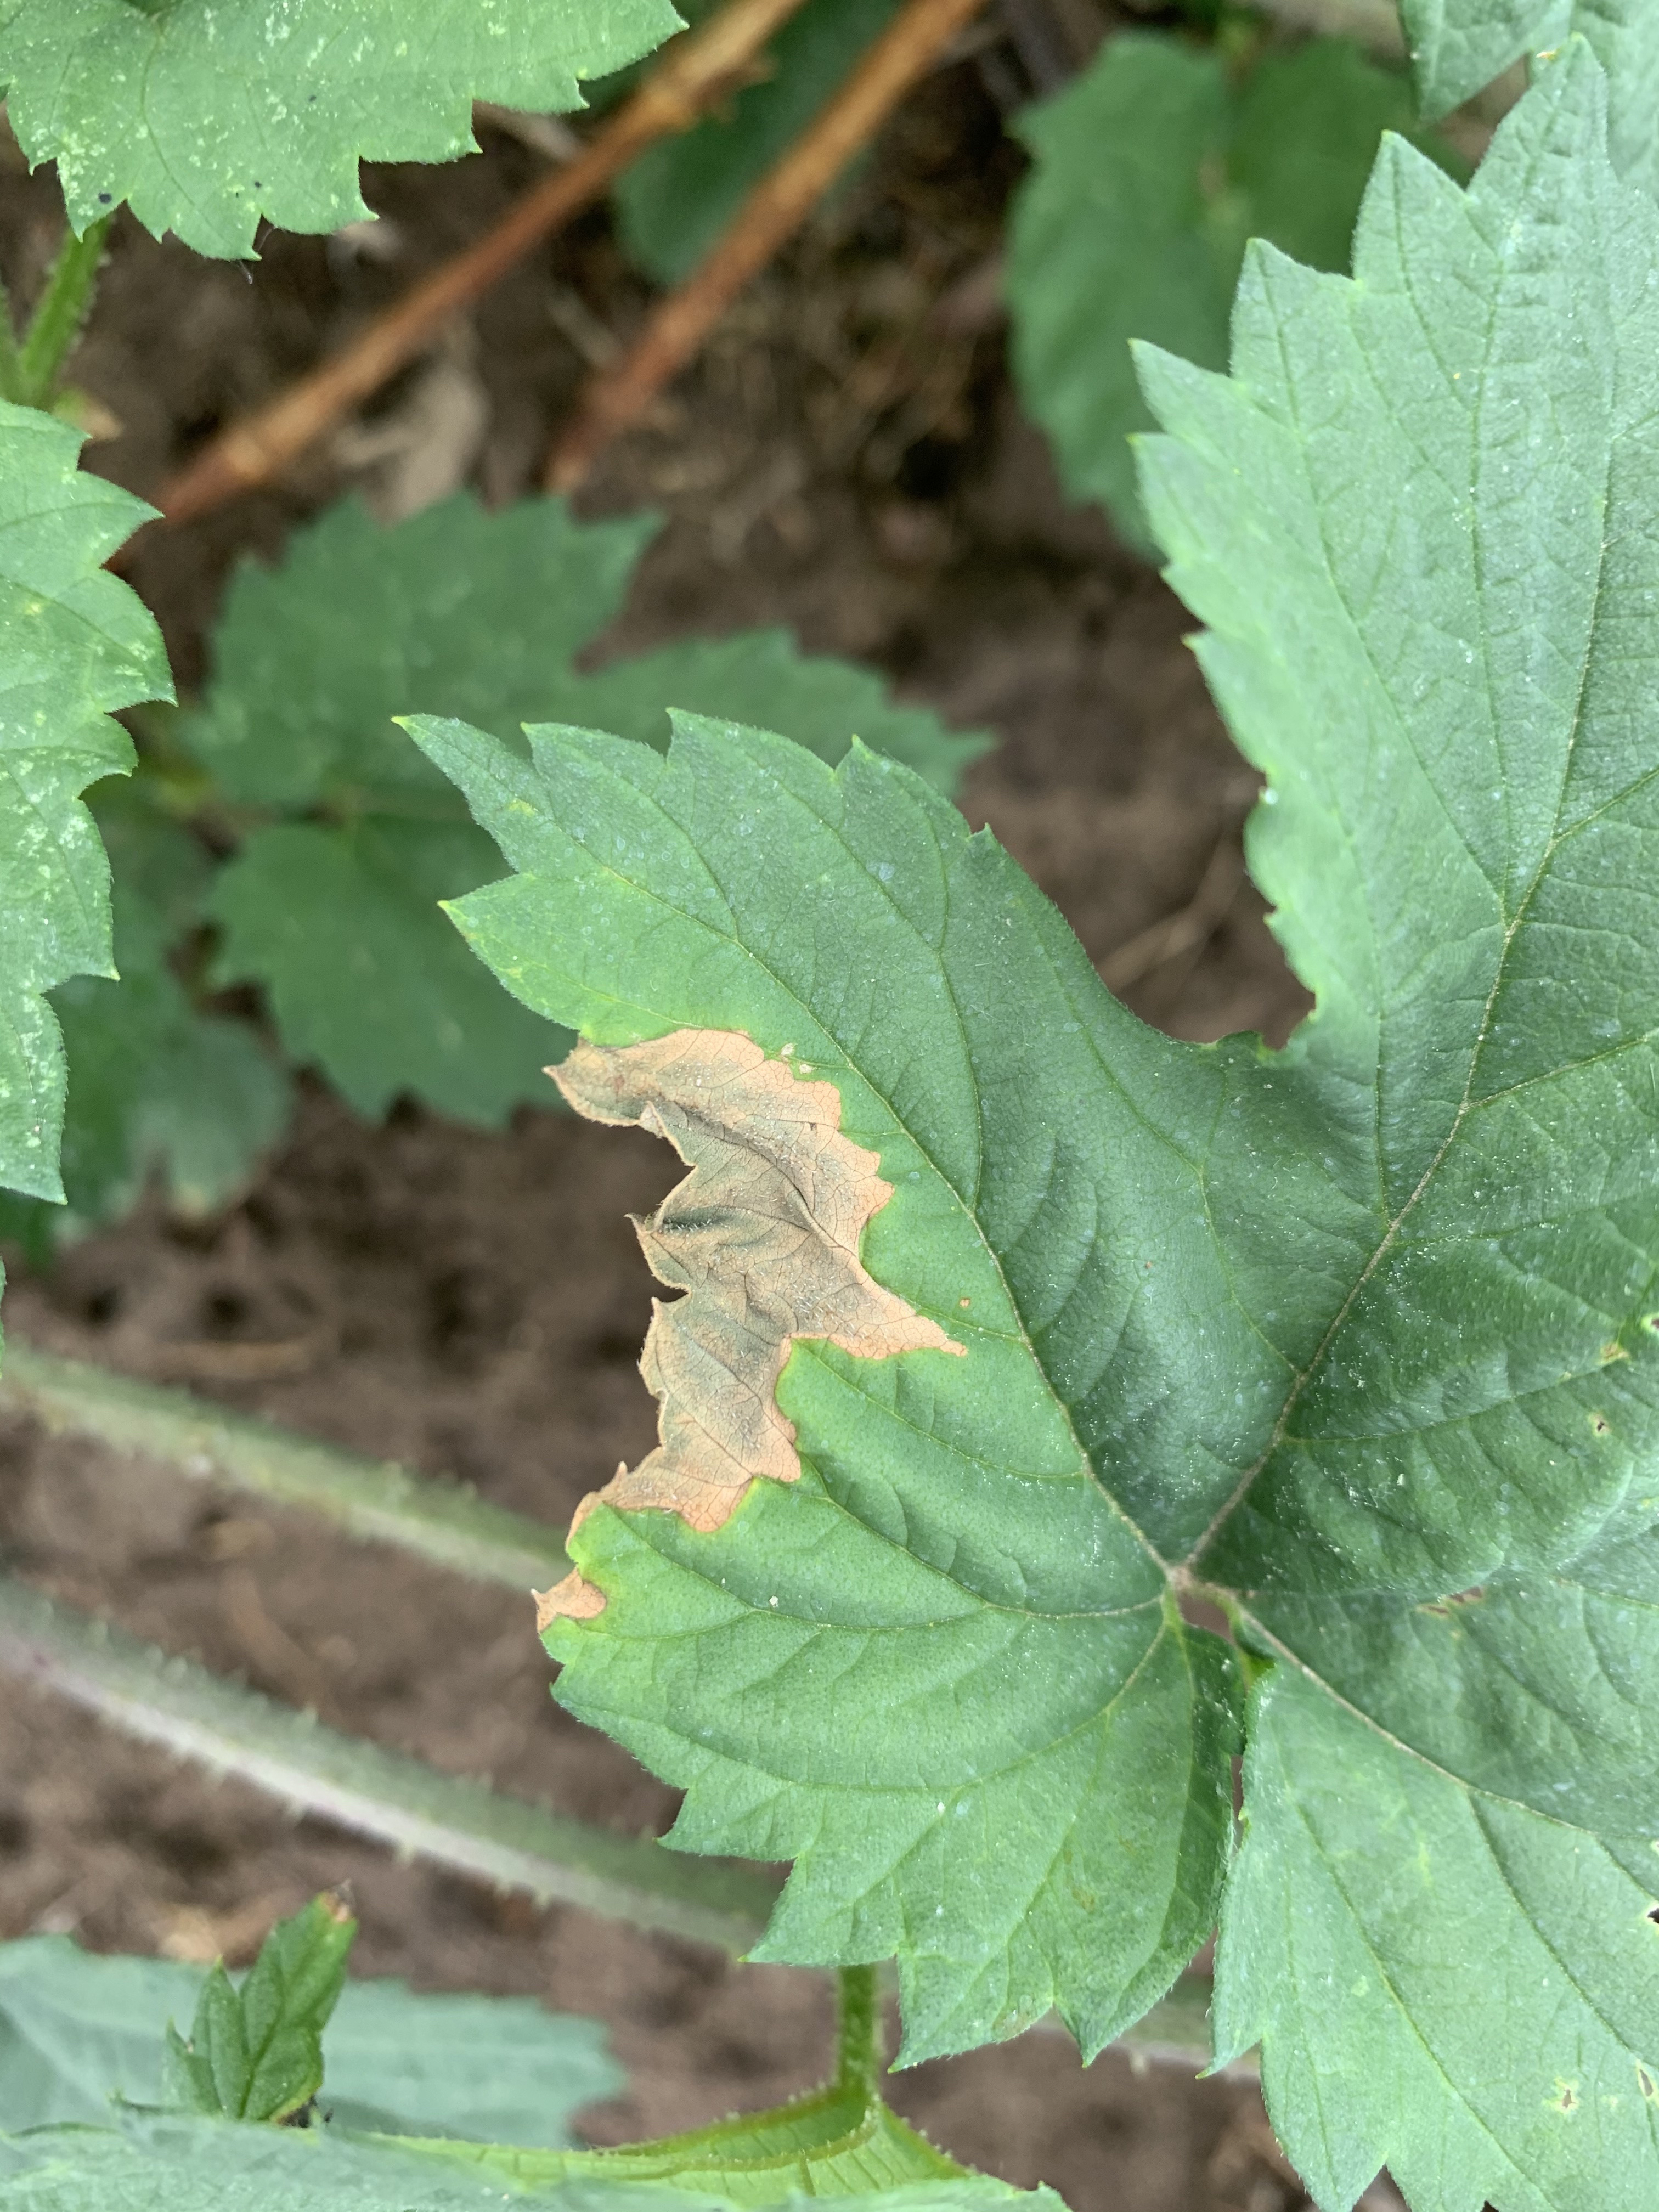 Early symptoms of halo blight